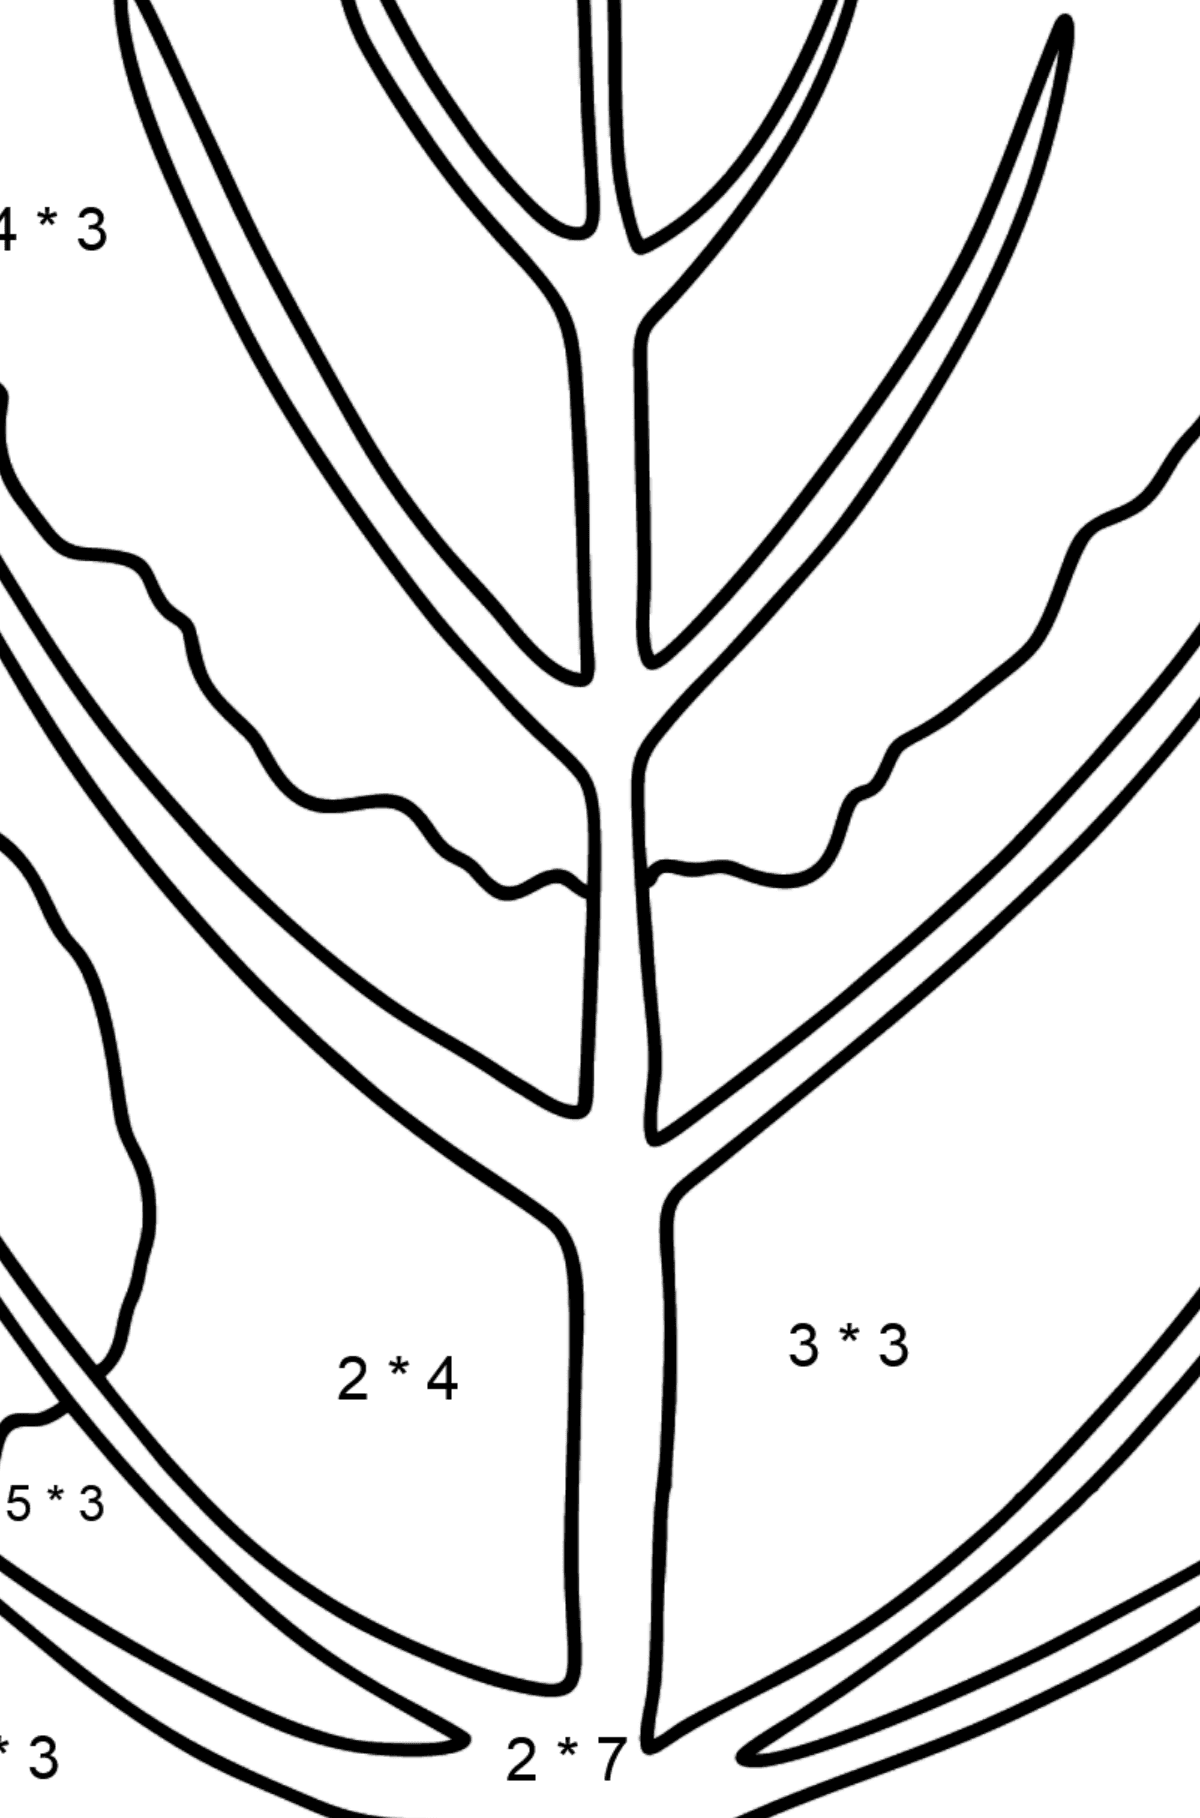 Aspen Leaf coloring page - Math Coloring - Multiplication for Kids